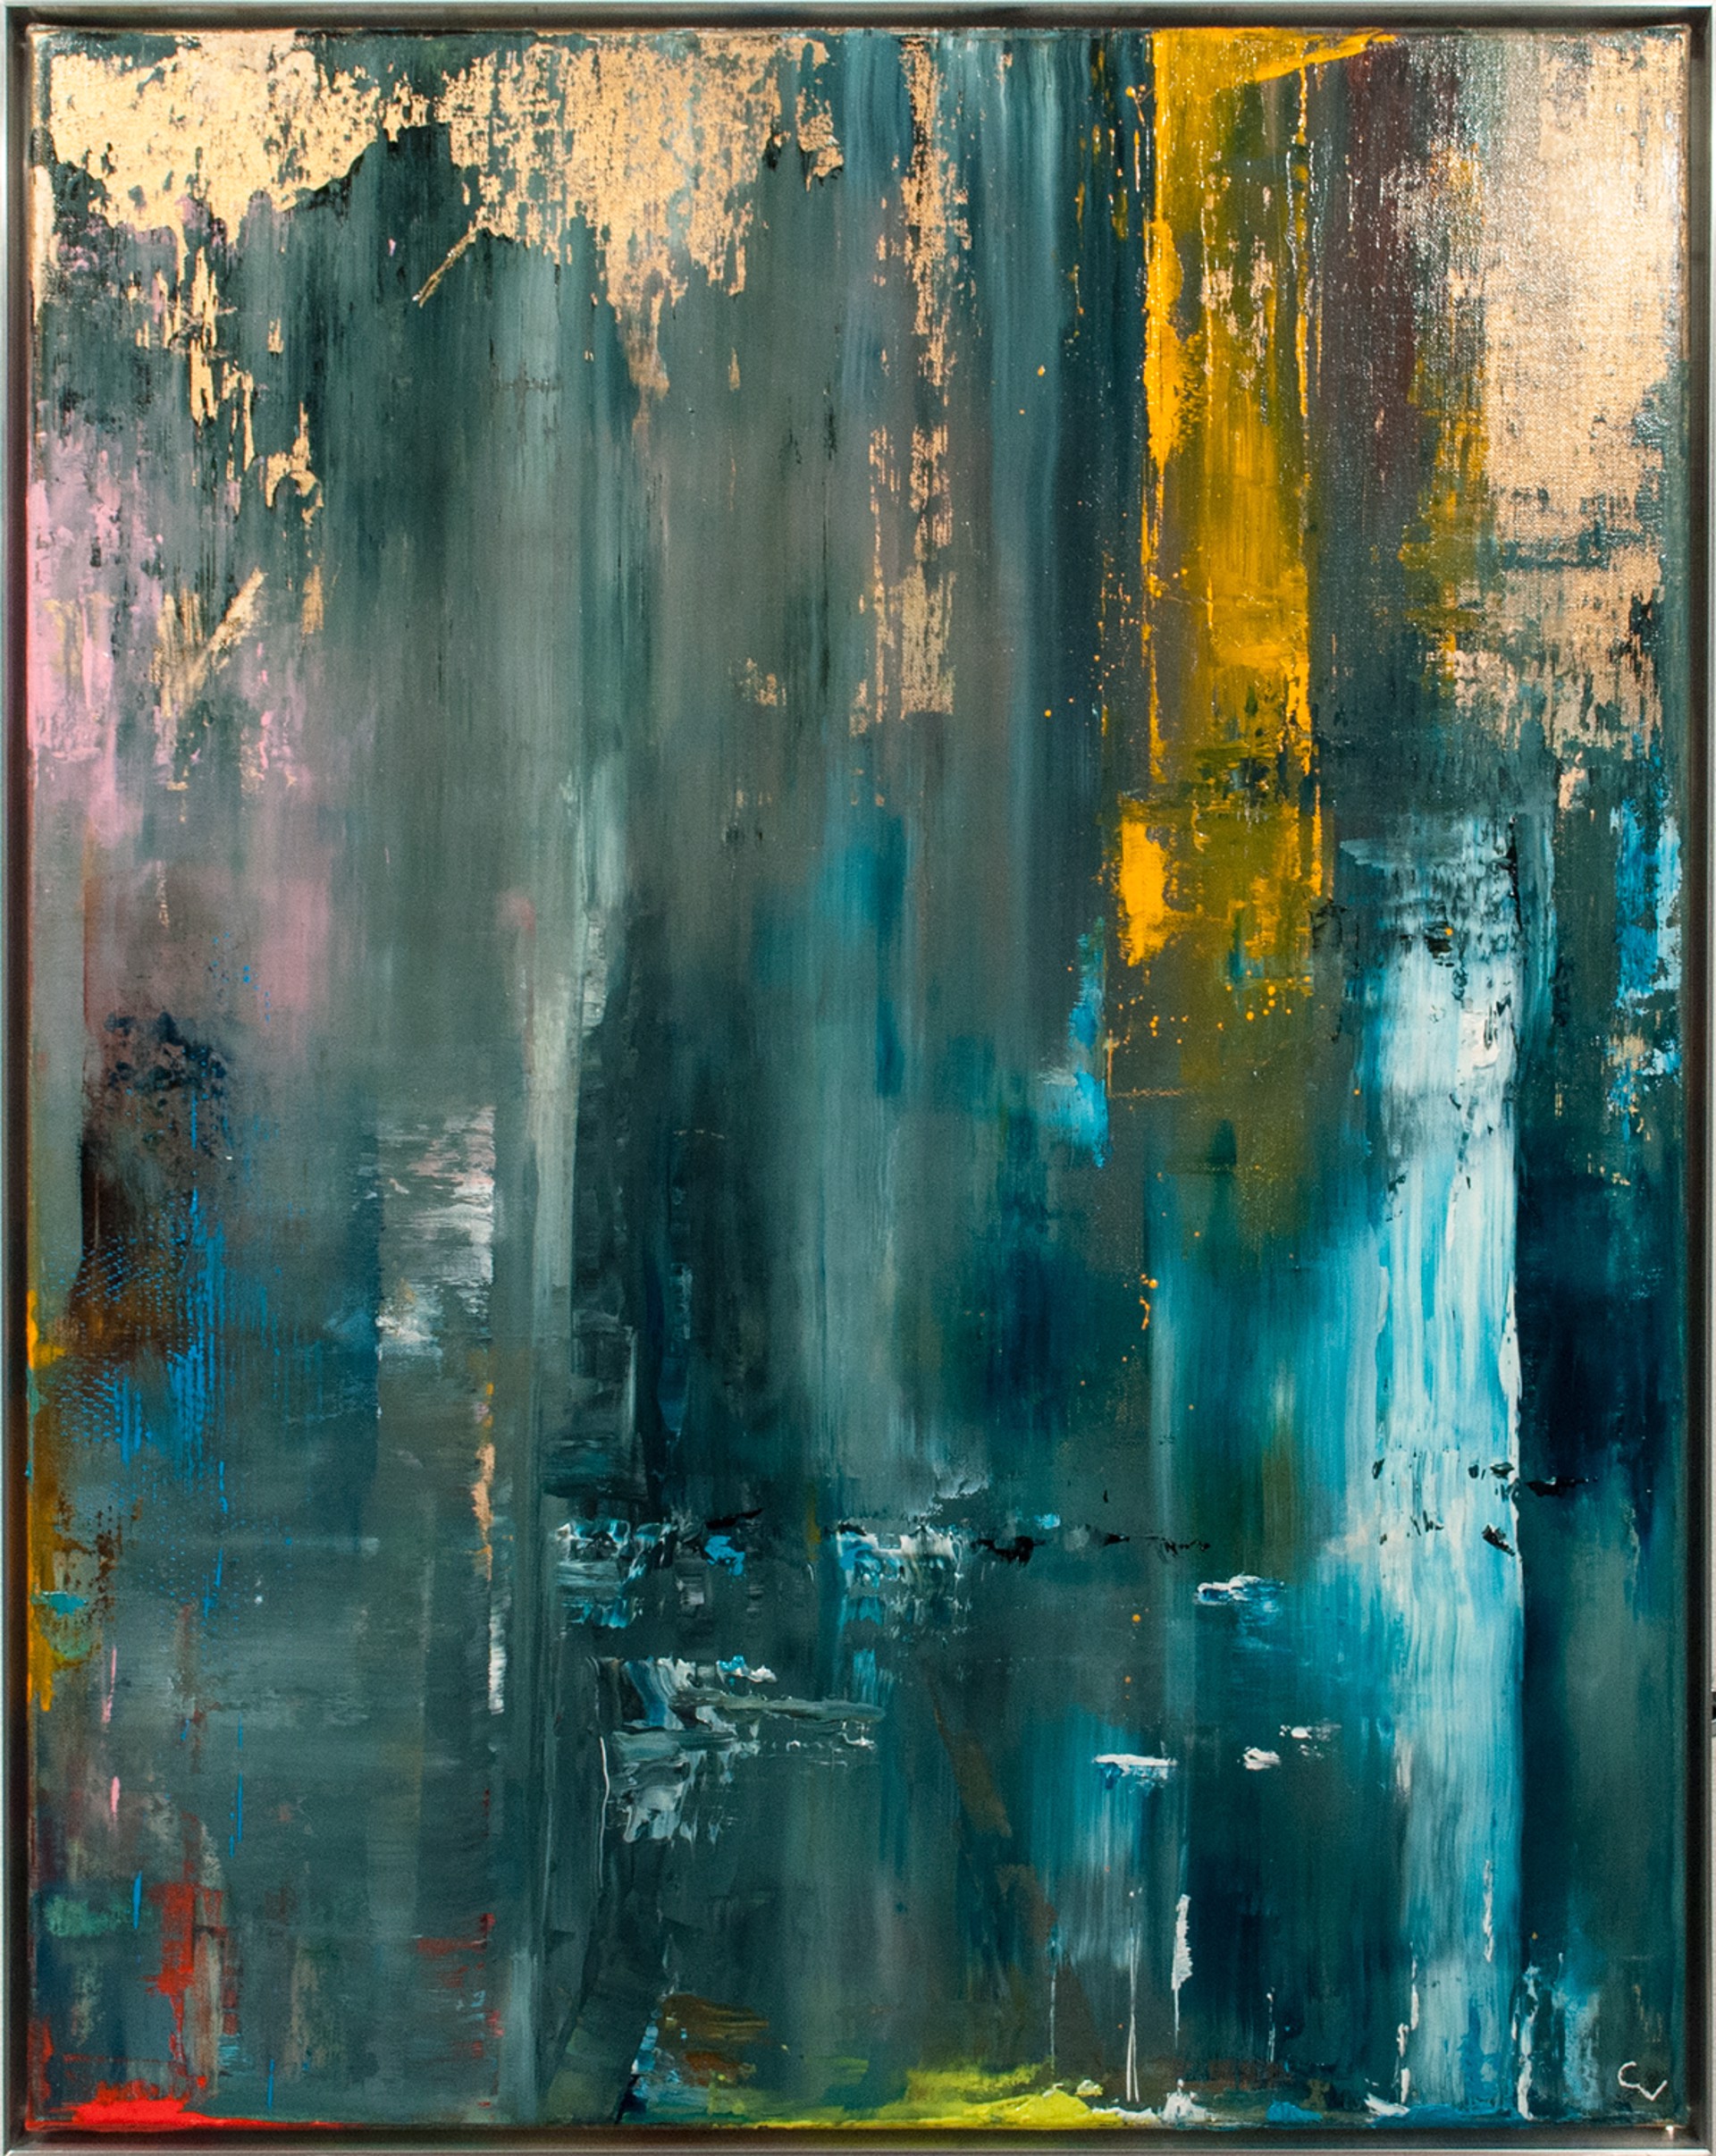 Abstract With Turquoise by Chris Veeneman